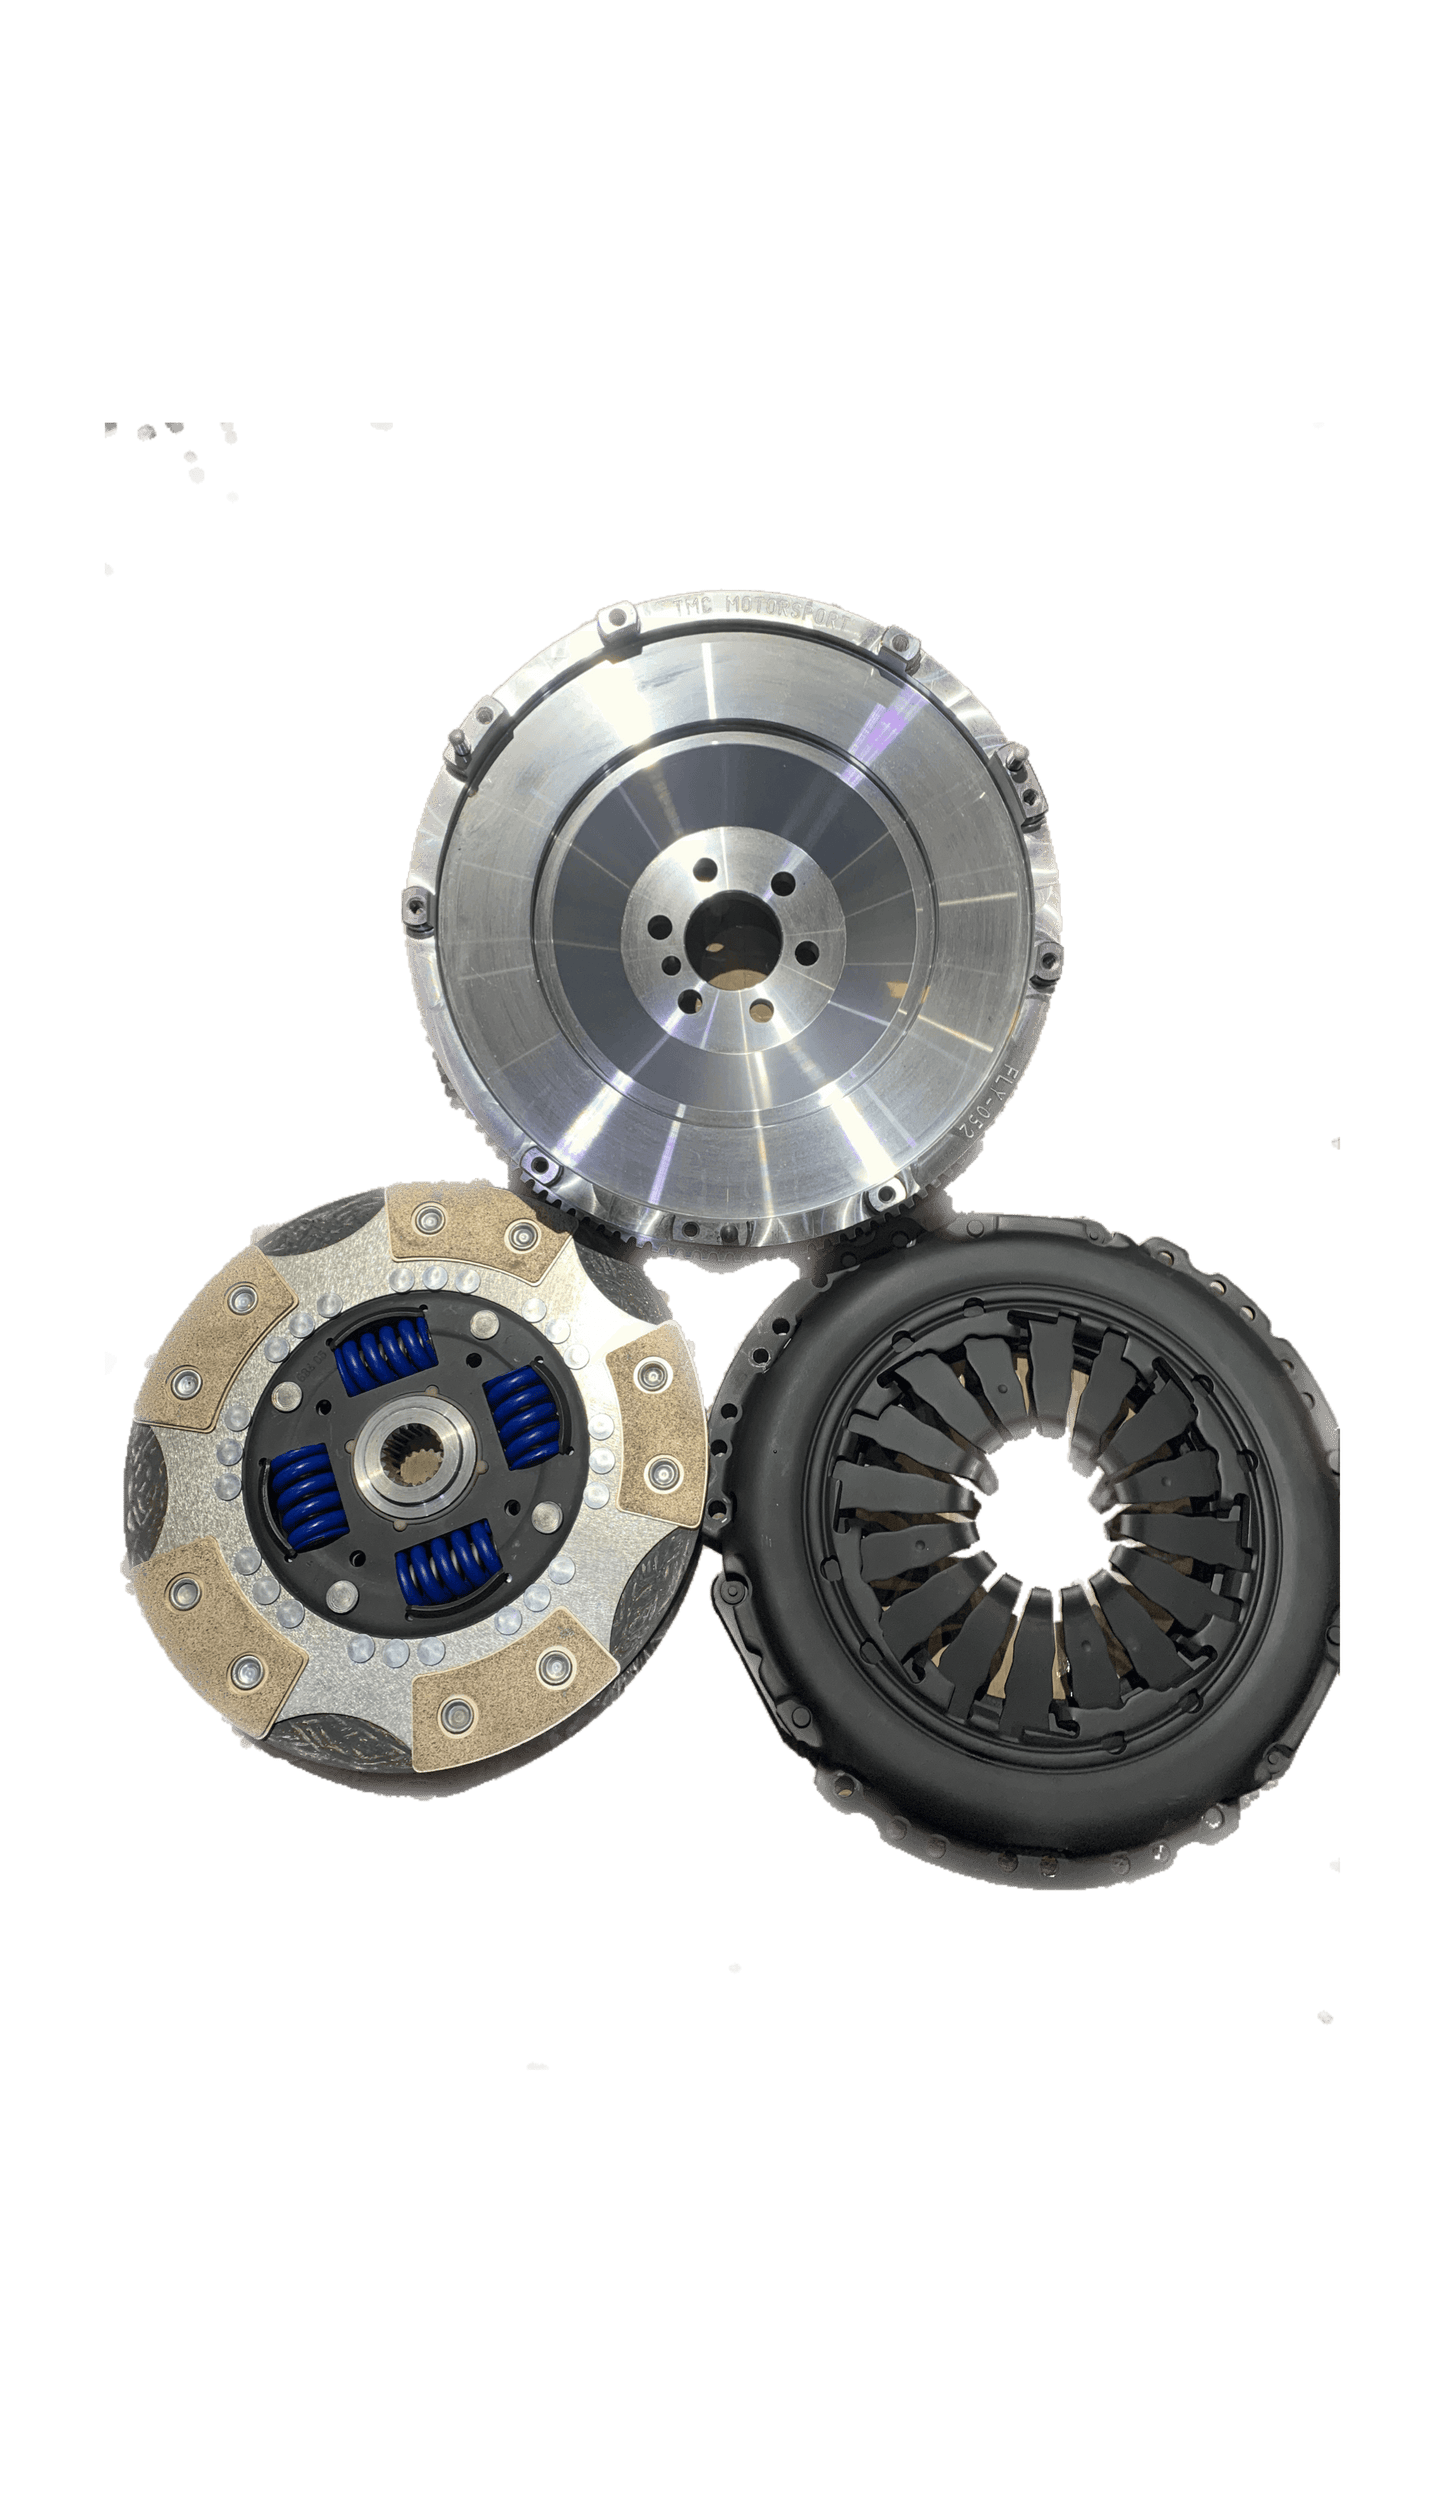 TMC Motorsport by CG Motorsport Dual Friction Performance Clutch Kit for Abarth 500/595/695 - Abarth Tuning